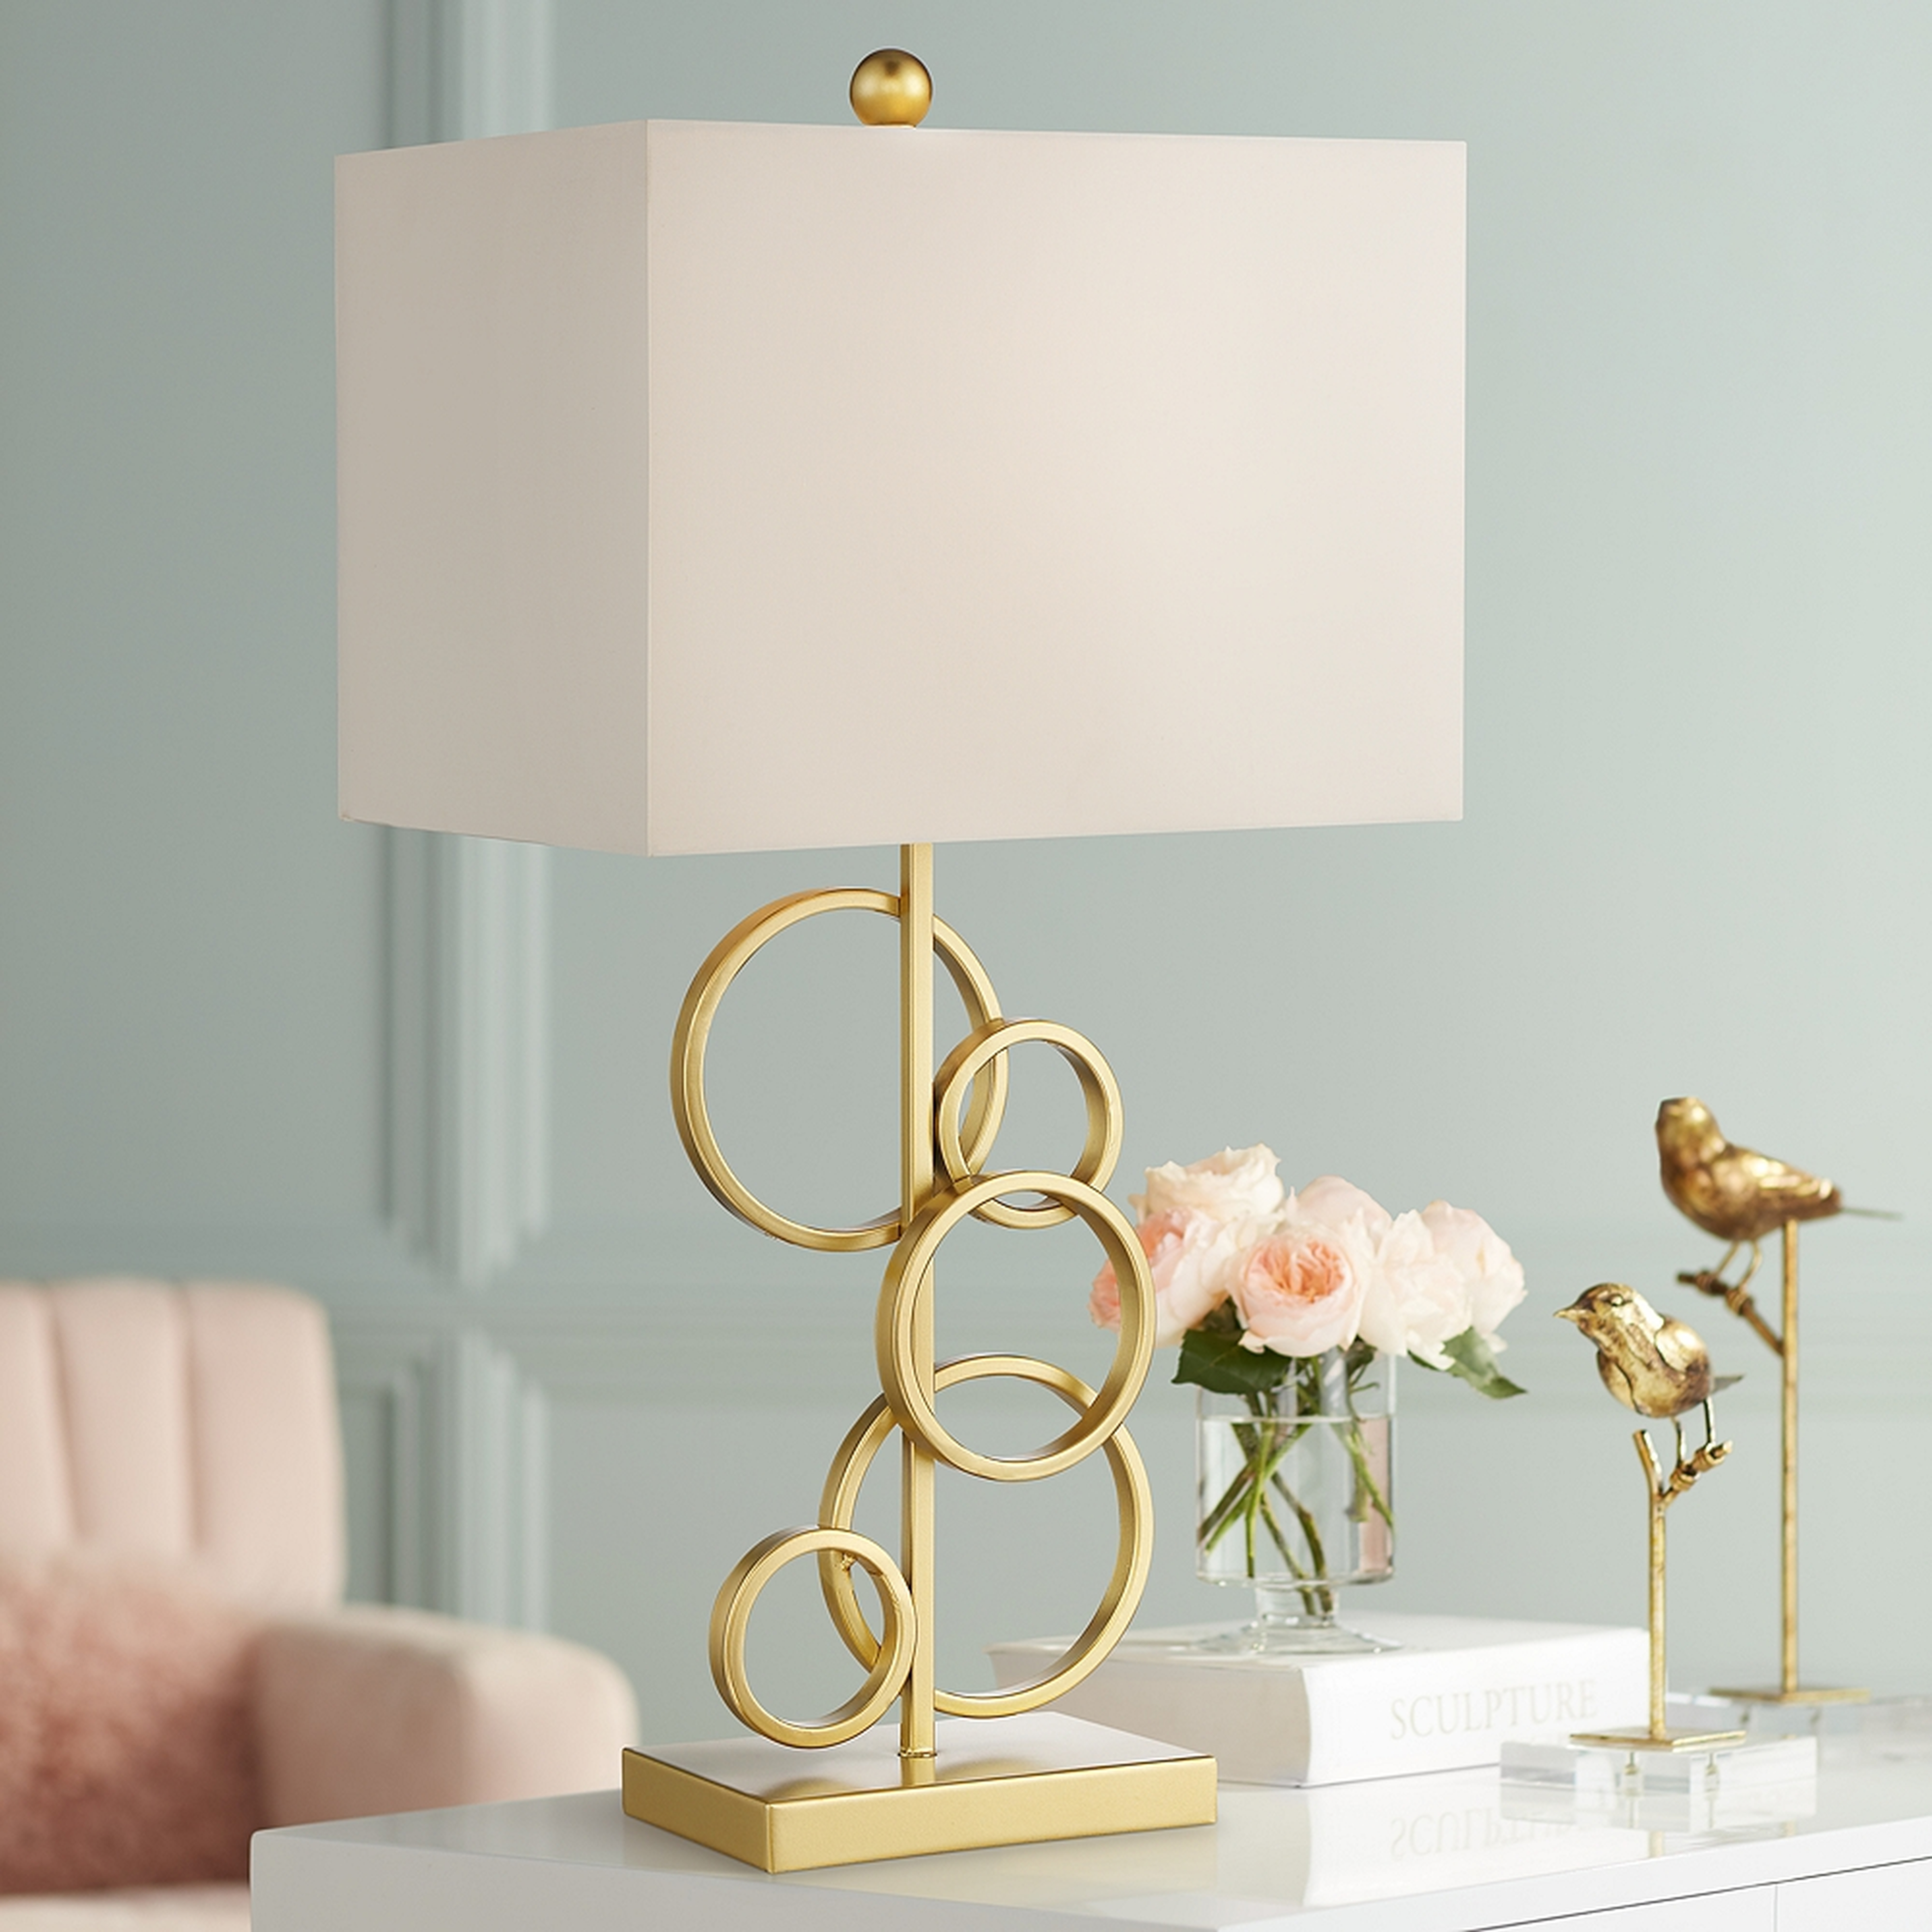 Saul Modern Gold Rings Table Lamp - Style # 93E85 - Lamps Plus